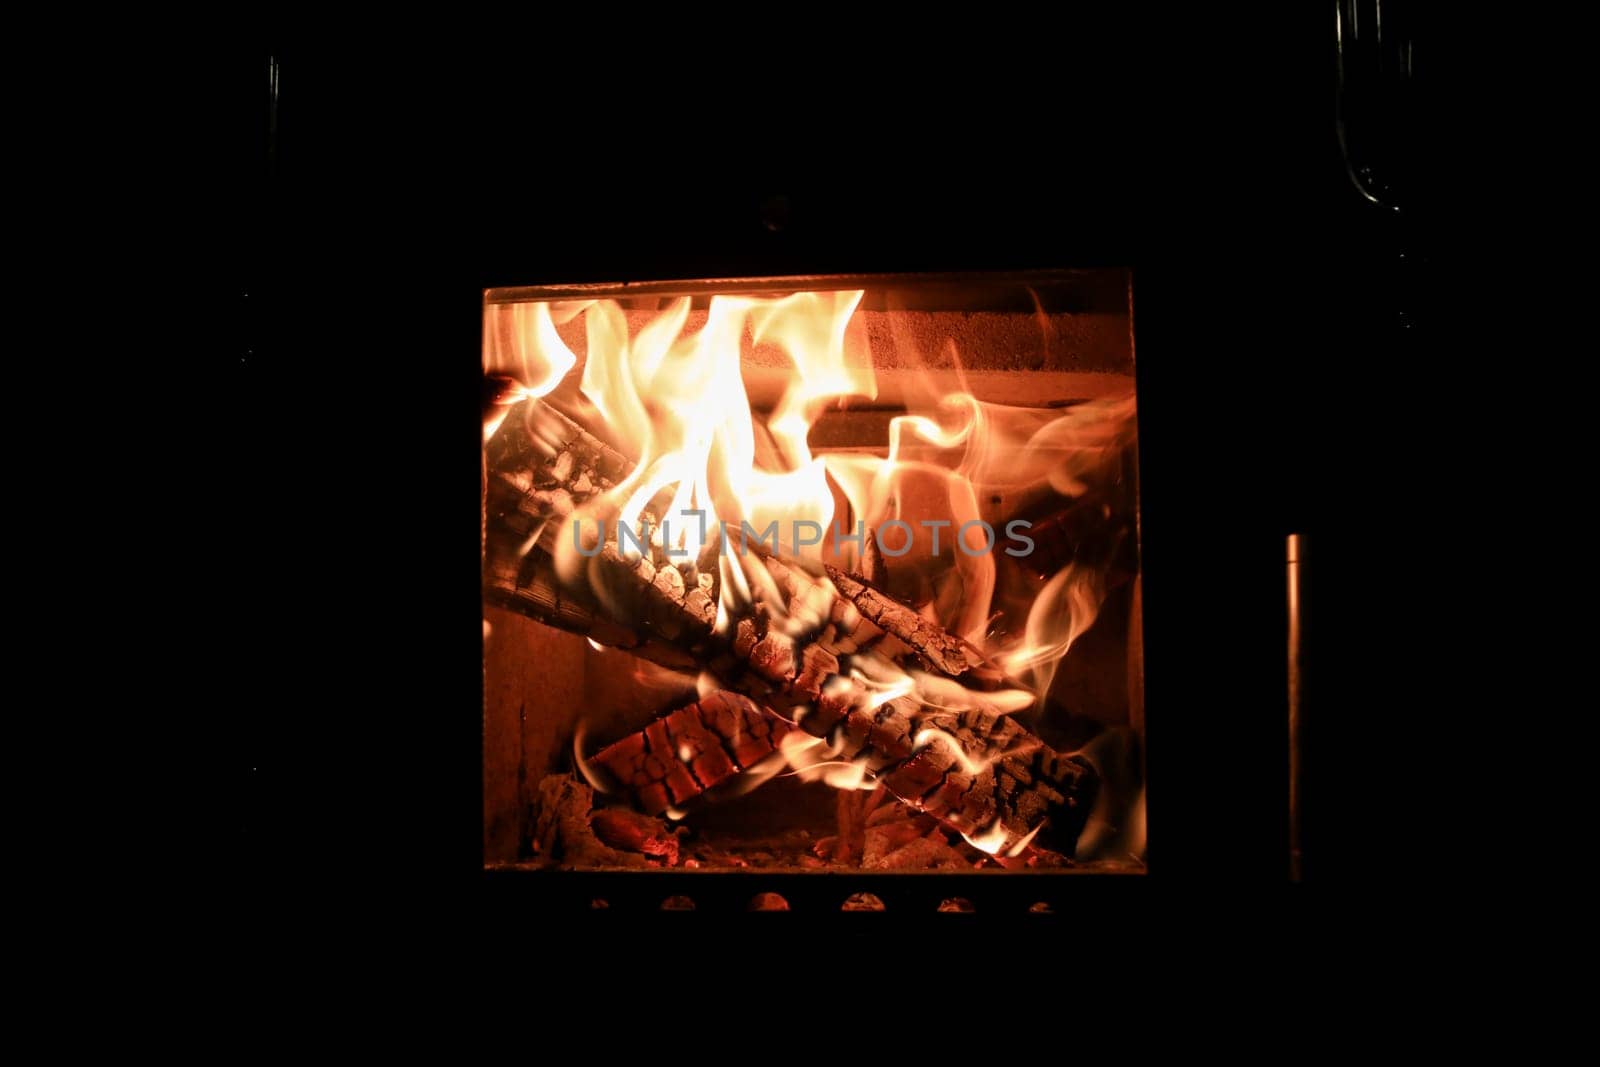 Bright colored dancing flames in fireplace. Close up of burning firewood. Cozy warm background.